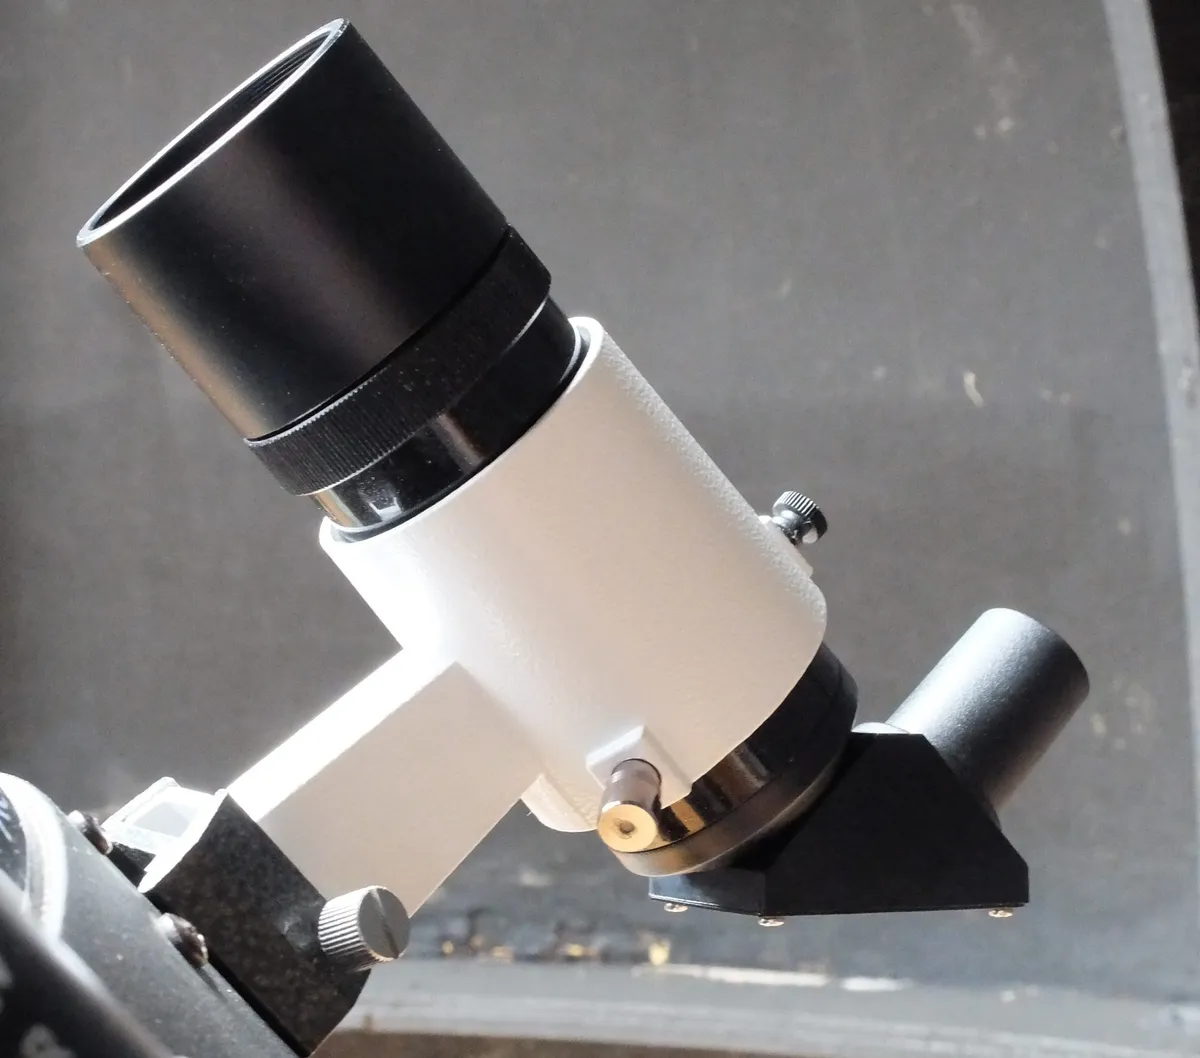 Skywatcher 9x50 Right-Angled Erecting Finderscope Credit: Mark Parrish